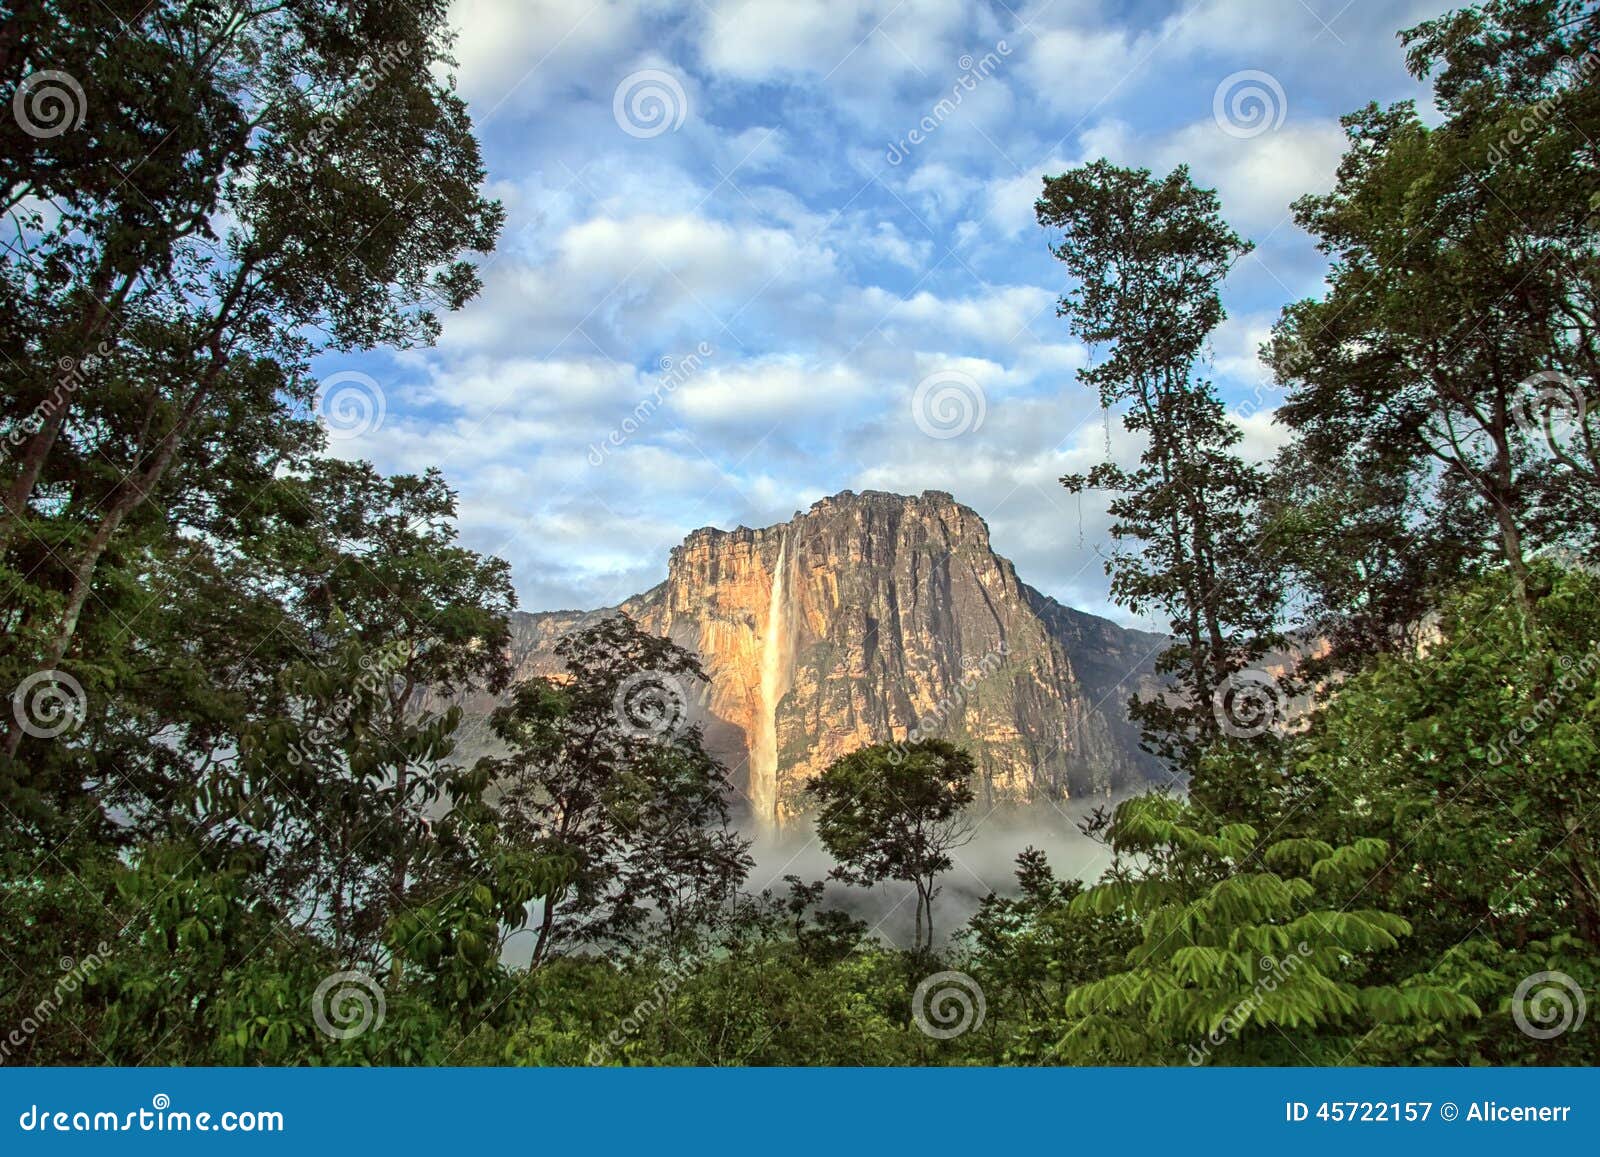 salto angel falls in the soft light on early morning